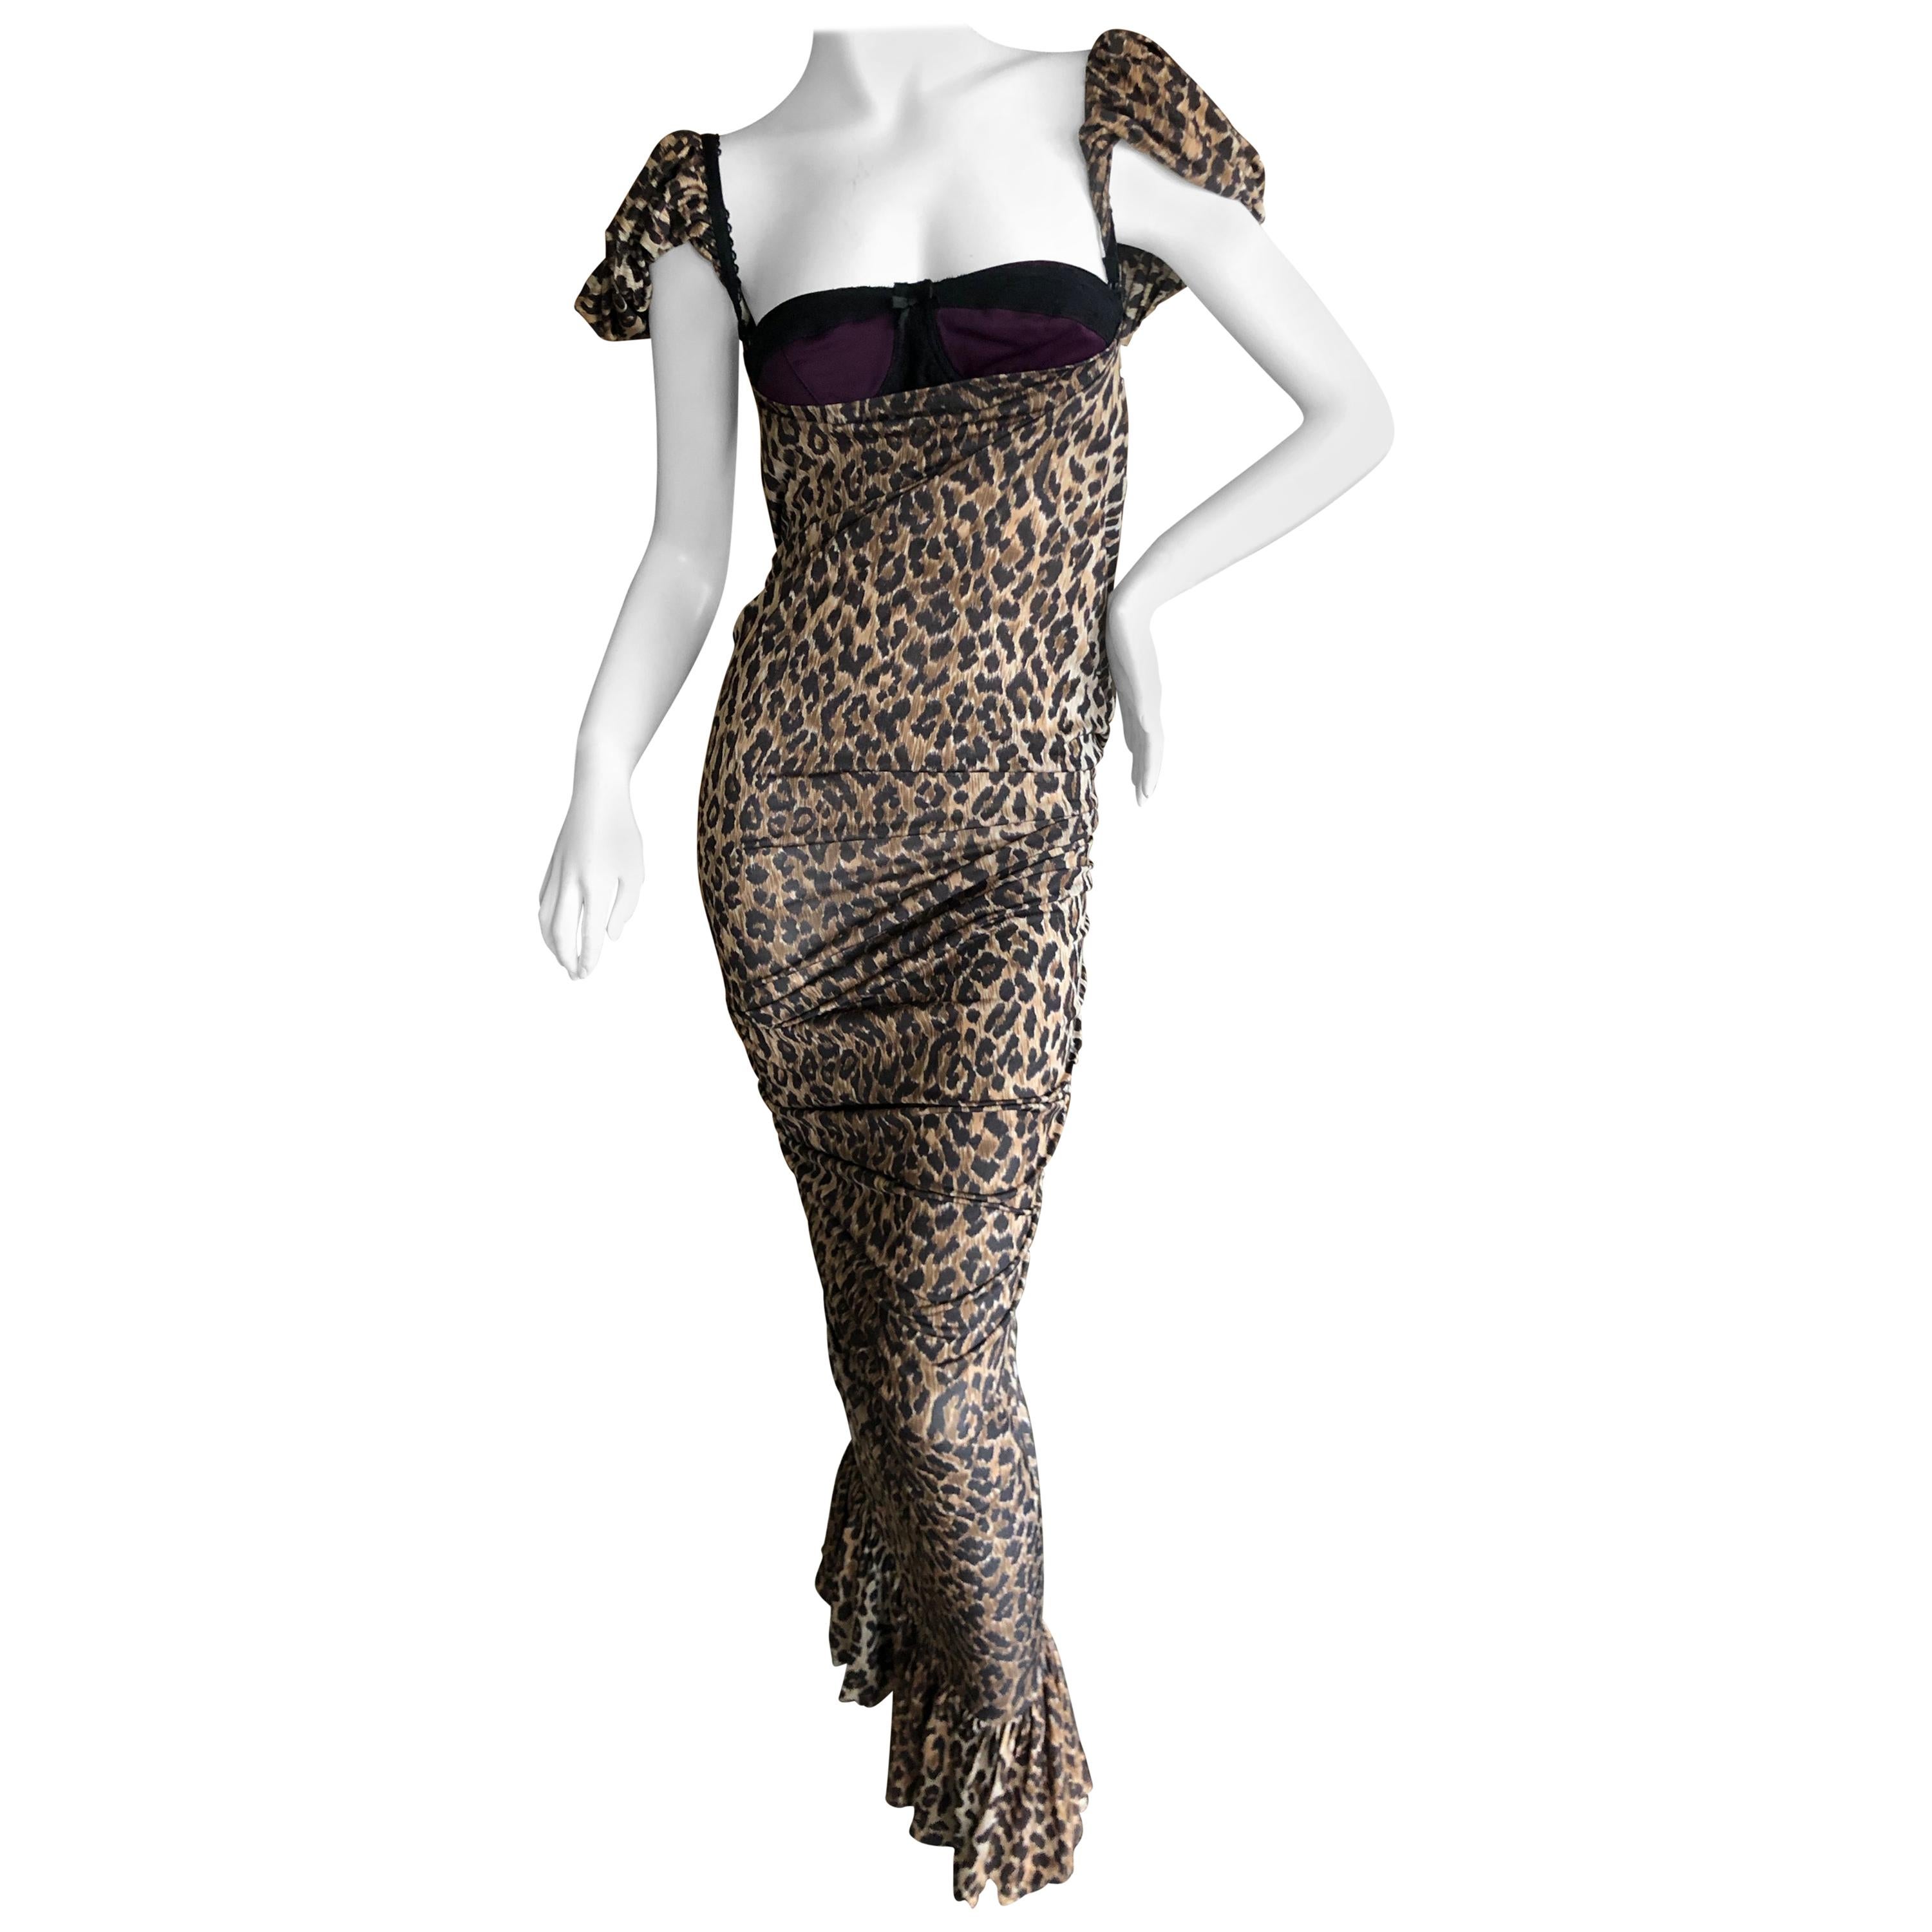 Dolce & Gabbana for D&G Vintage Leopard Print Cocktail Dress with Attached Bra For Sale